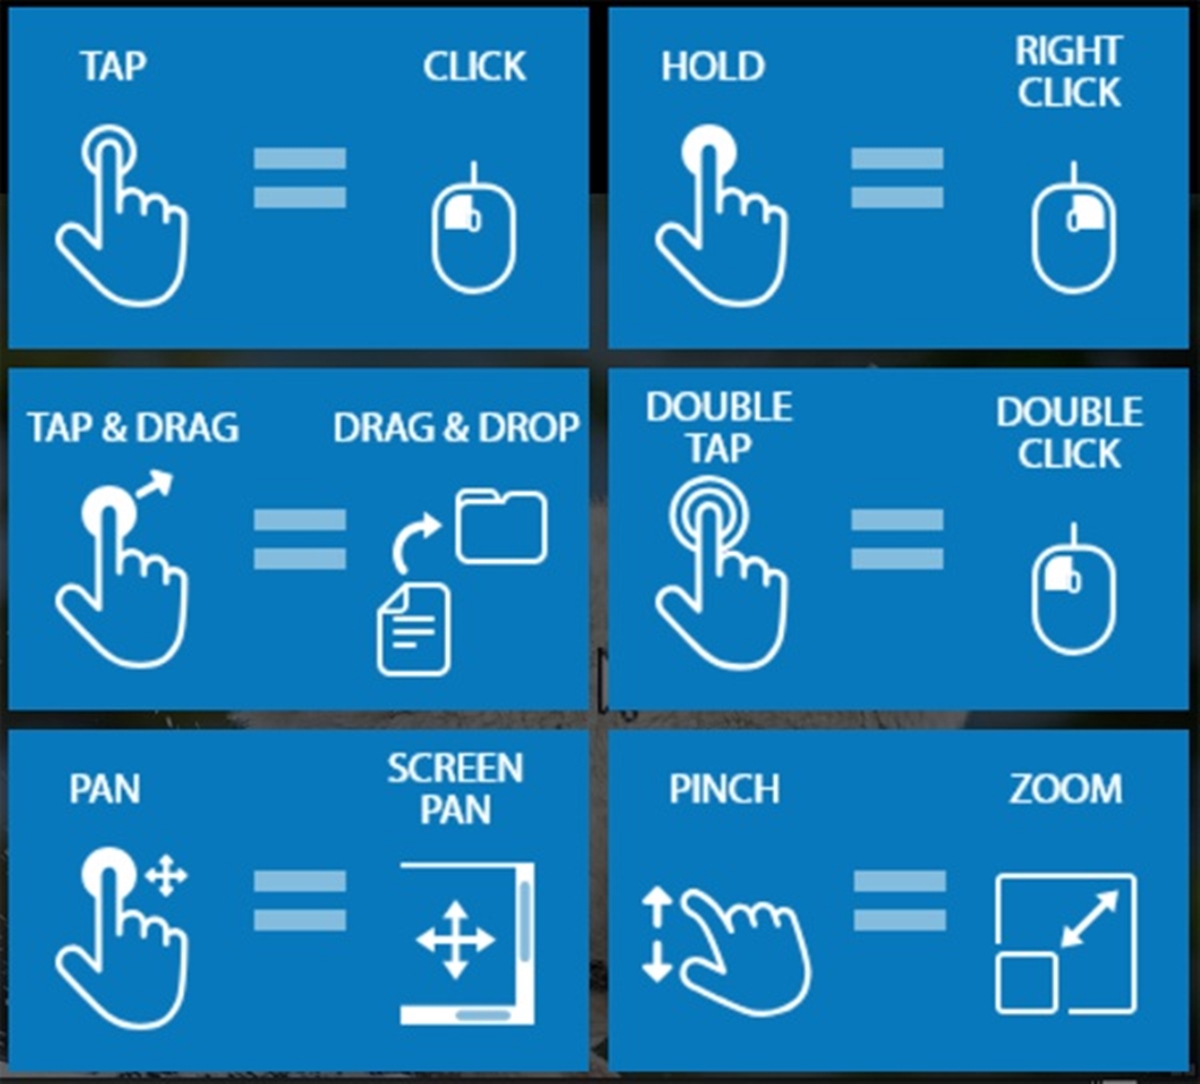 how-to-right-click-on-a-touchscreen